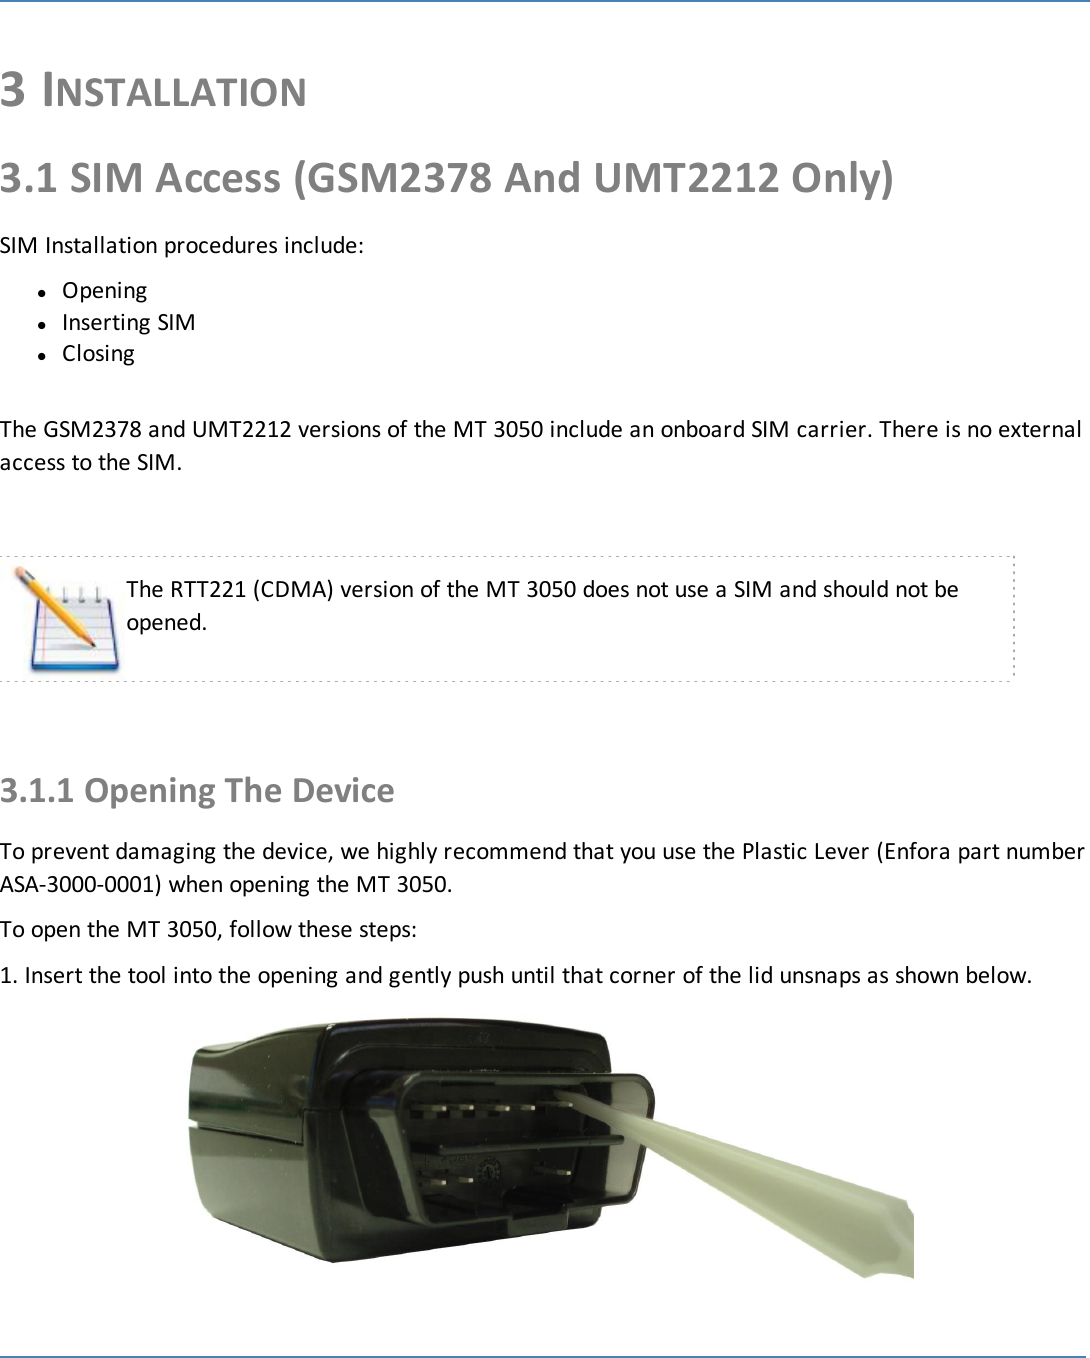 153 INSTALLATION3.1 SIM Access (GSM2378 And UMT2212 Only)SIM Installation procedures include:lOpeninglInserting SIMlClosingThe GSM2378 and UMT2212 versions of the MT 3050 include an onboard SIM carrier. There is no externalaccess to the SIM.The RTT221 (CDMA) version of the MT 3050 does not use a SIM and should not beopened.3.1.1 Opening The DeviceTo prevent damaging the device, we highly recommend that you use the Plastic Lever (Enfora part numberASA-3000-0001) when opening the MT 3050.To open the MT 3050, follow these steps:1. Insert the tool into the opening and gently push until that corner of the lid unsnaps as shown below.